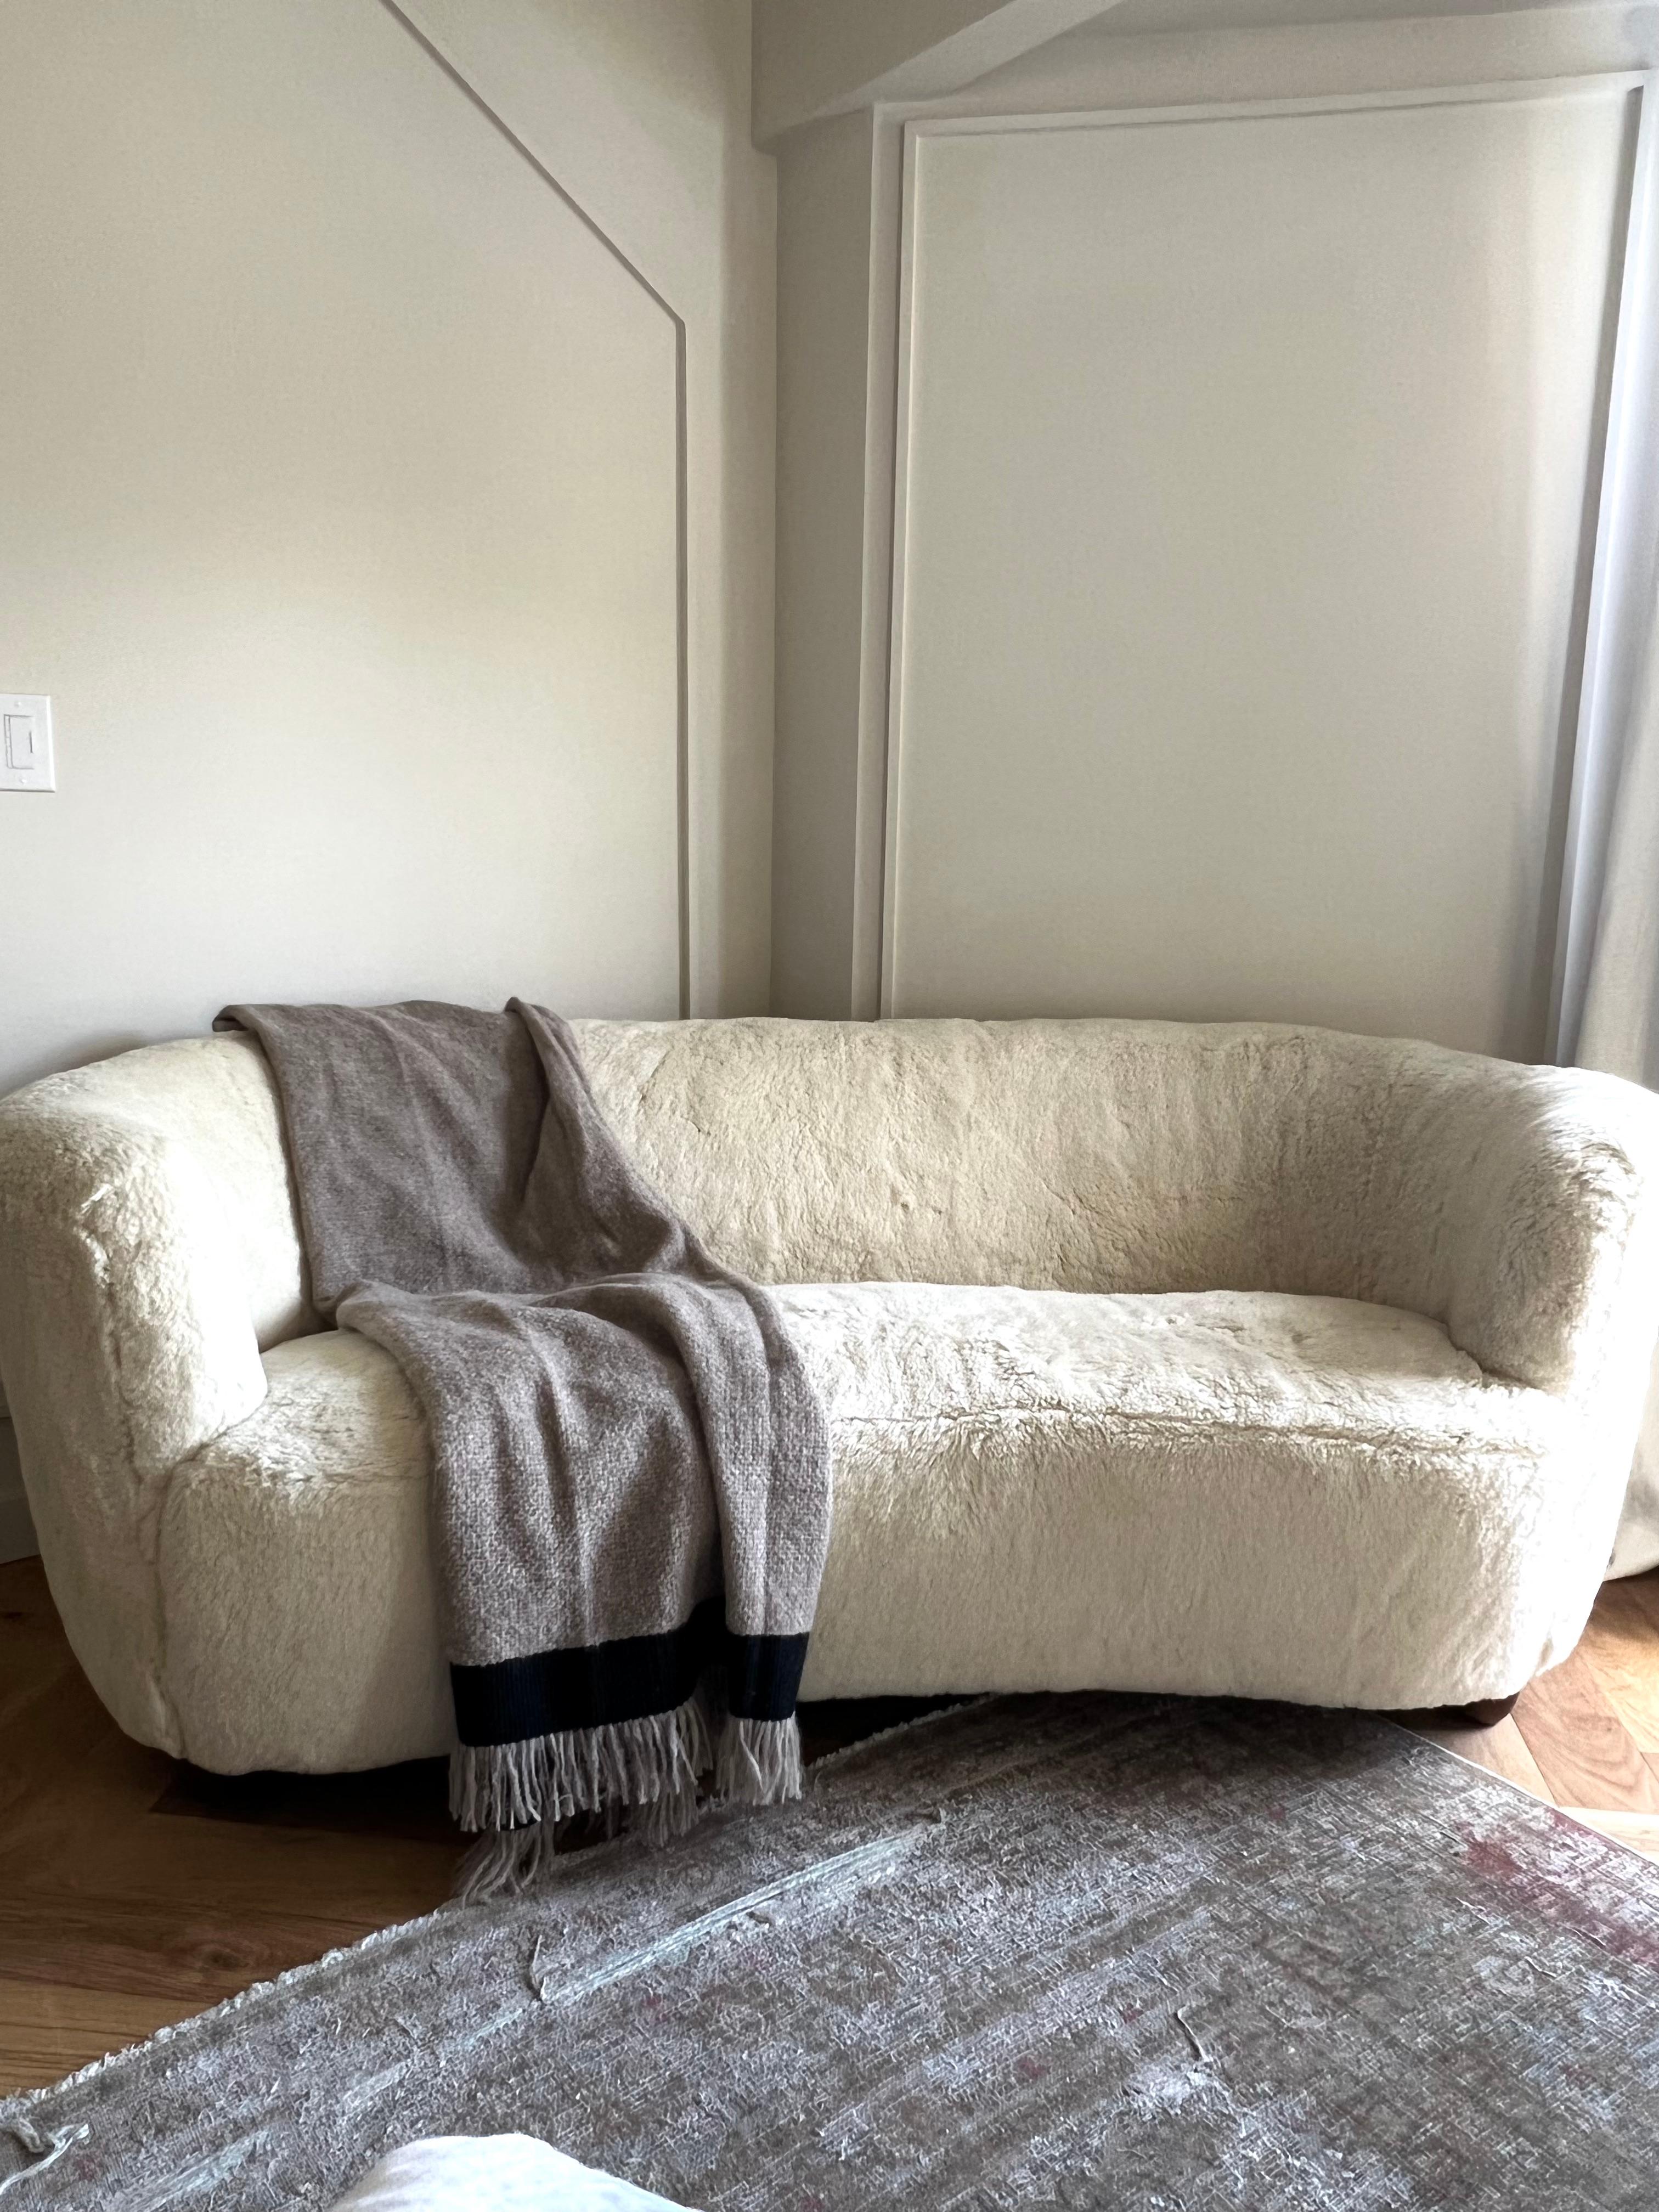 1930s Viggo Boesen banana shaped sofa/loveseat with channel back. Vintage MCM Danish design refurbished in 2019 and reupholstered in high quality cream shearling.